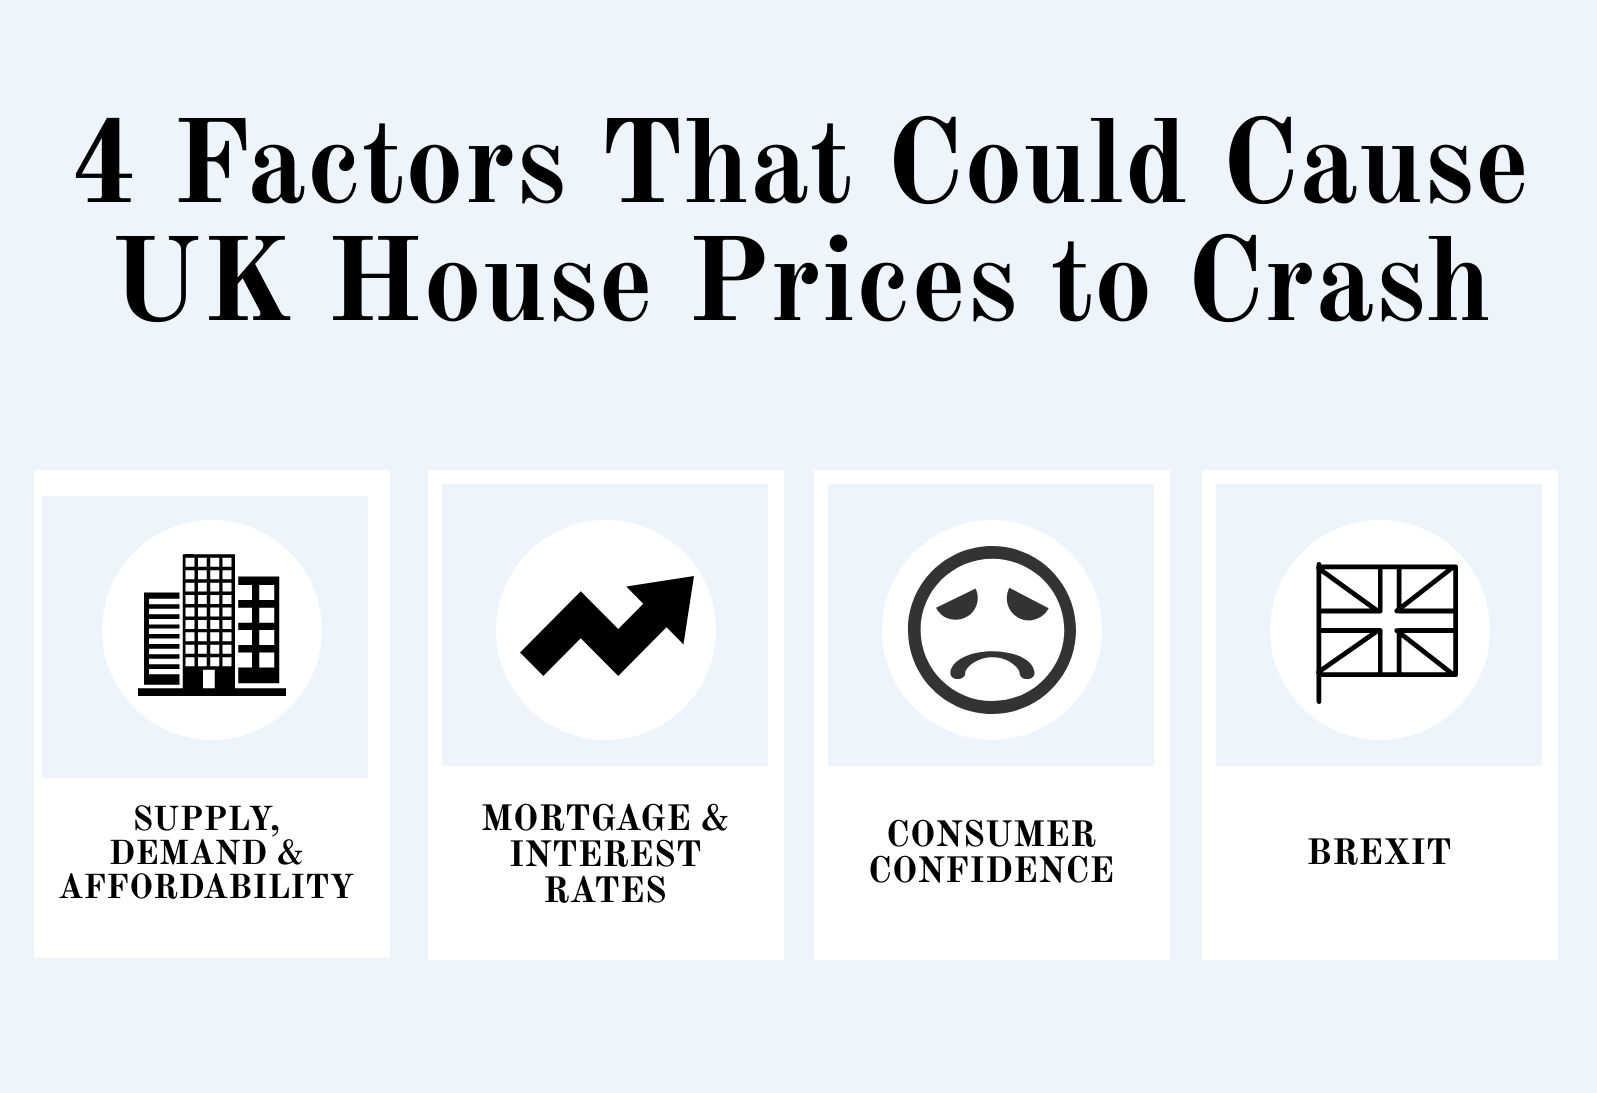 4 Factors that could cause uk house prices to crash (supply, mortgage & interest rates, Consumers, Brexit)